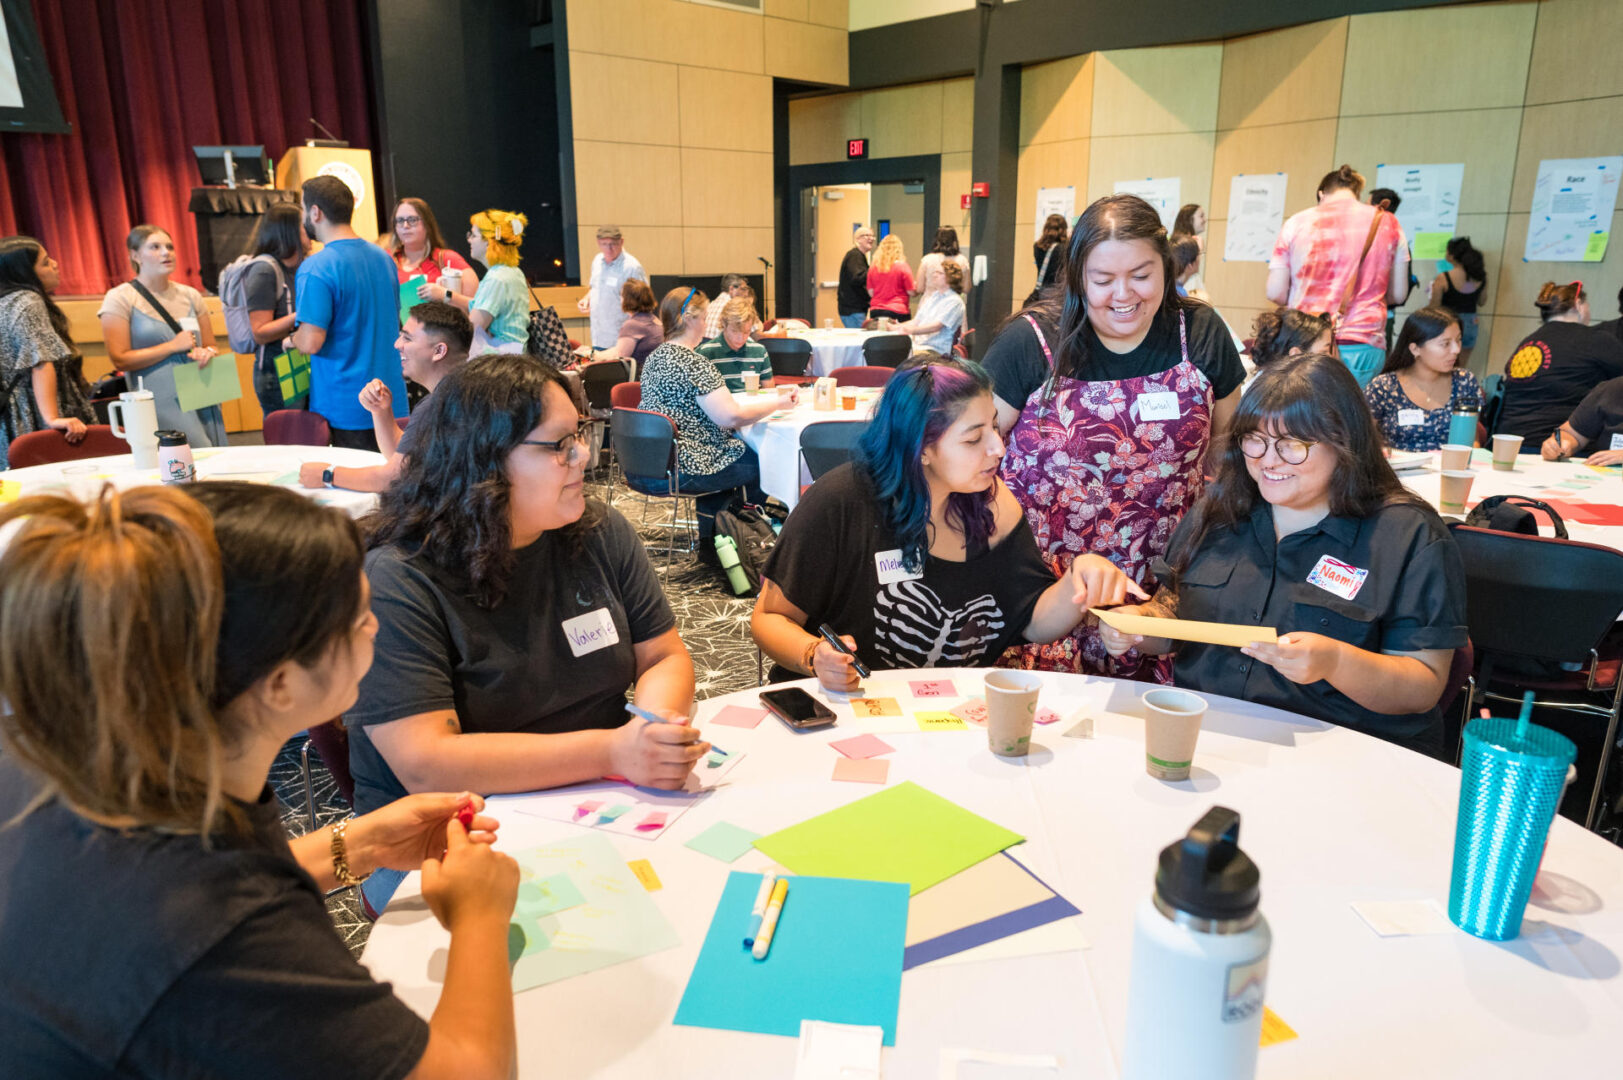 Students Andrea Grijalva, Valerie Barragan, Melissa Garibay, Marisol Marquez, and Naomi Gomez (left to right) sit at a table working together on an activity while attending a professional development event as part of the NorCal GREAT Teachers Pipeline.